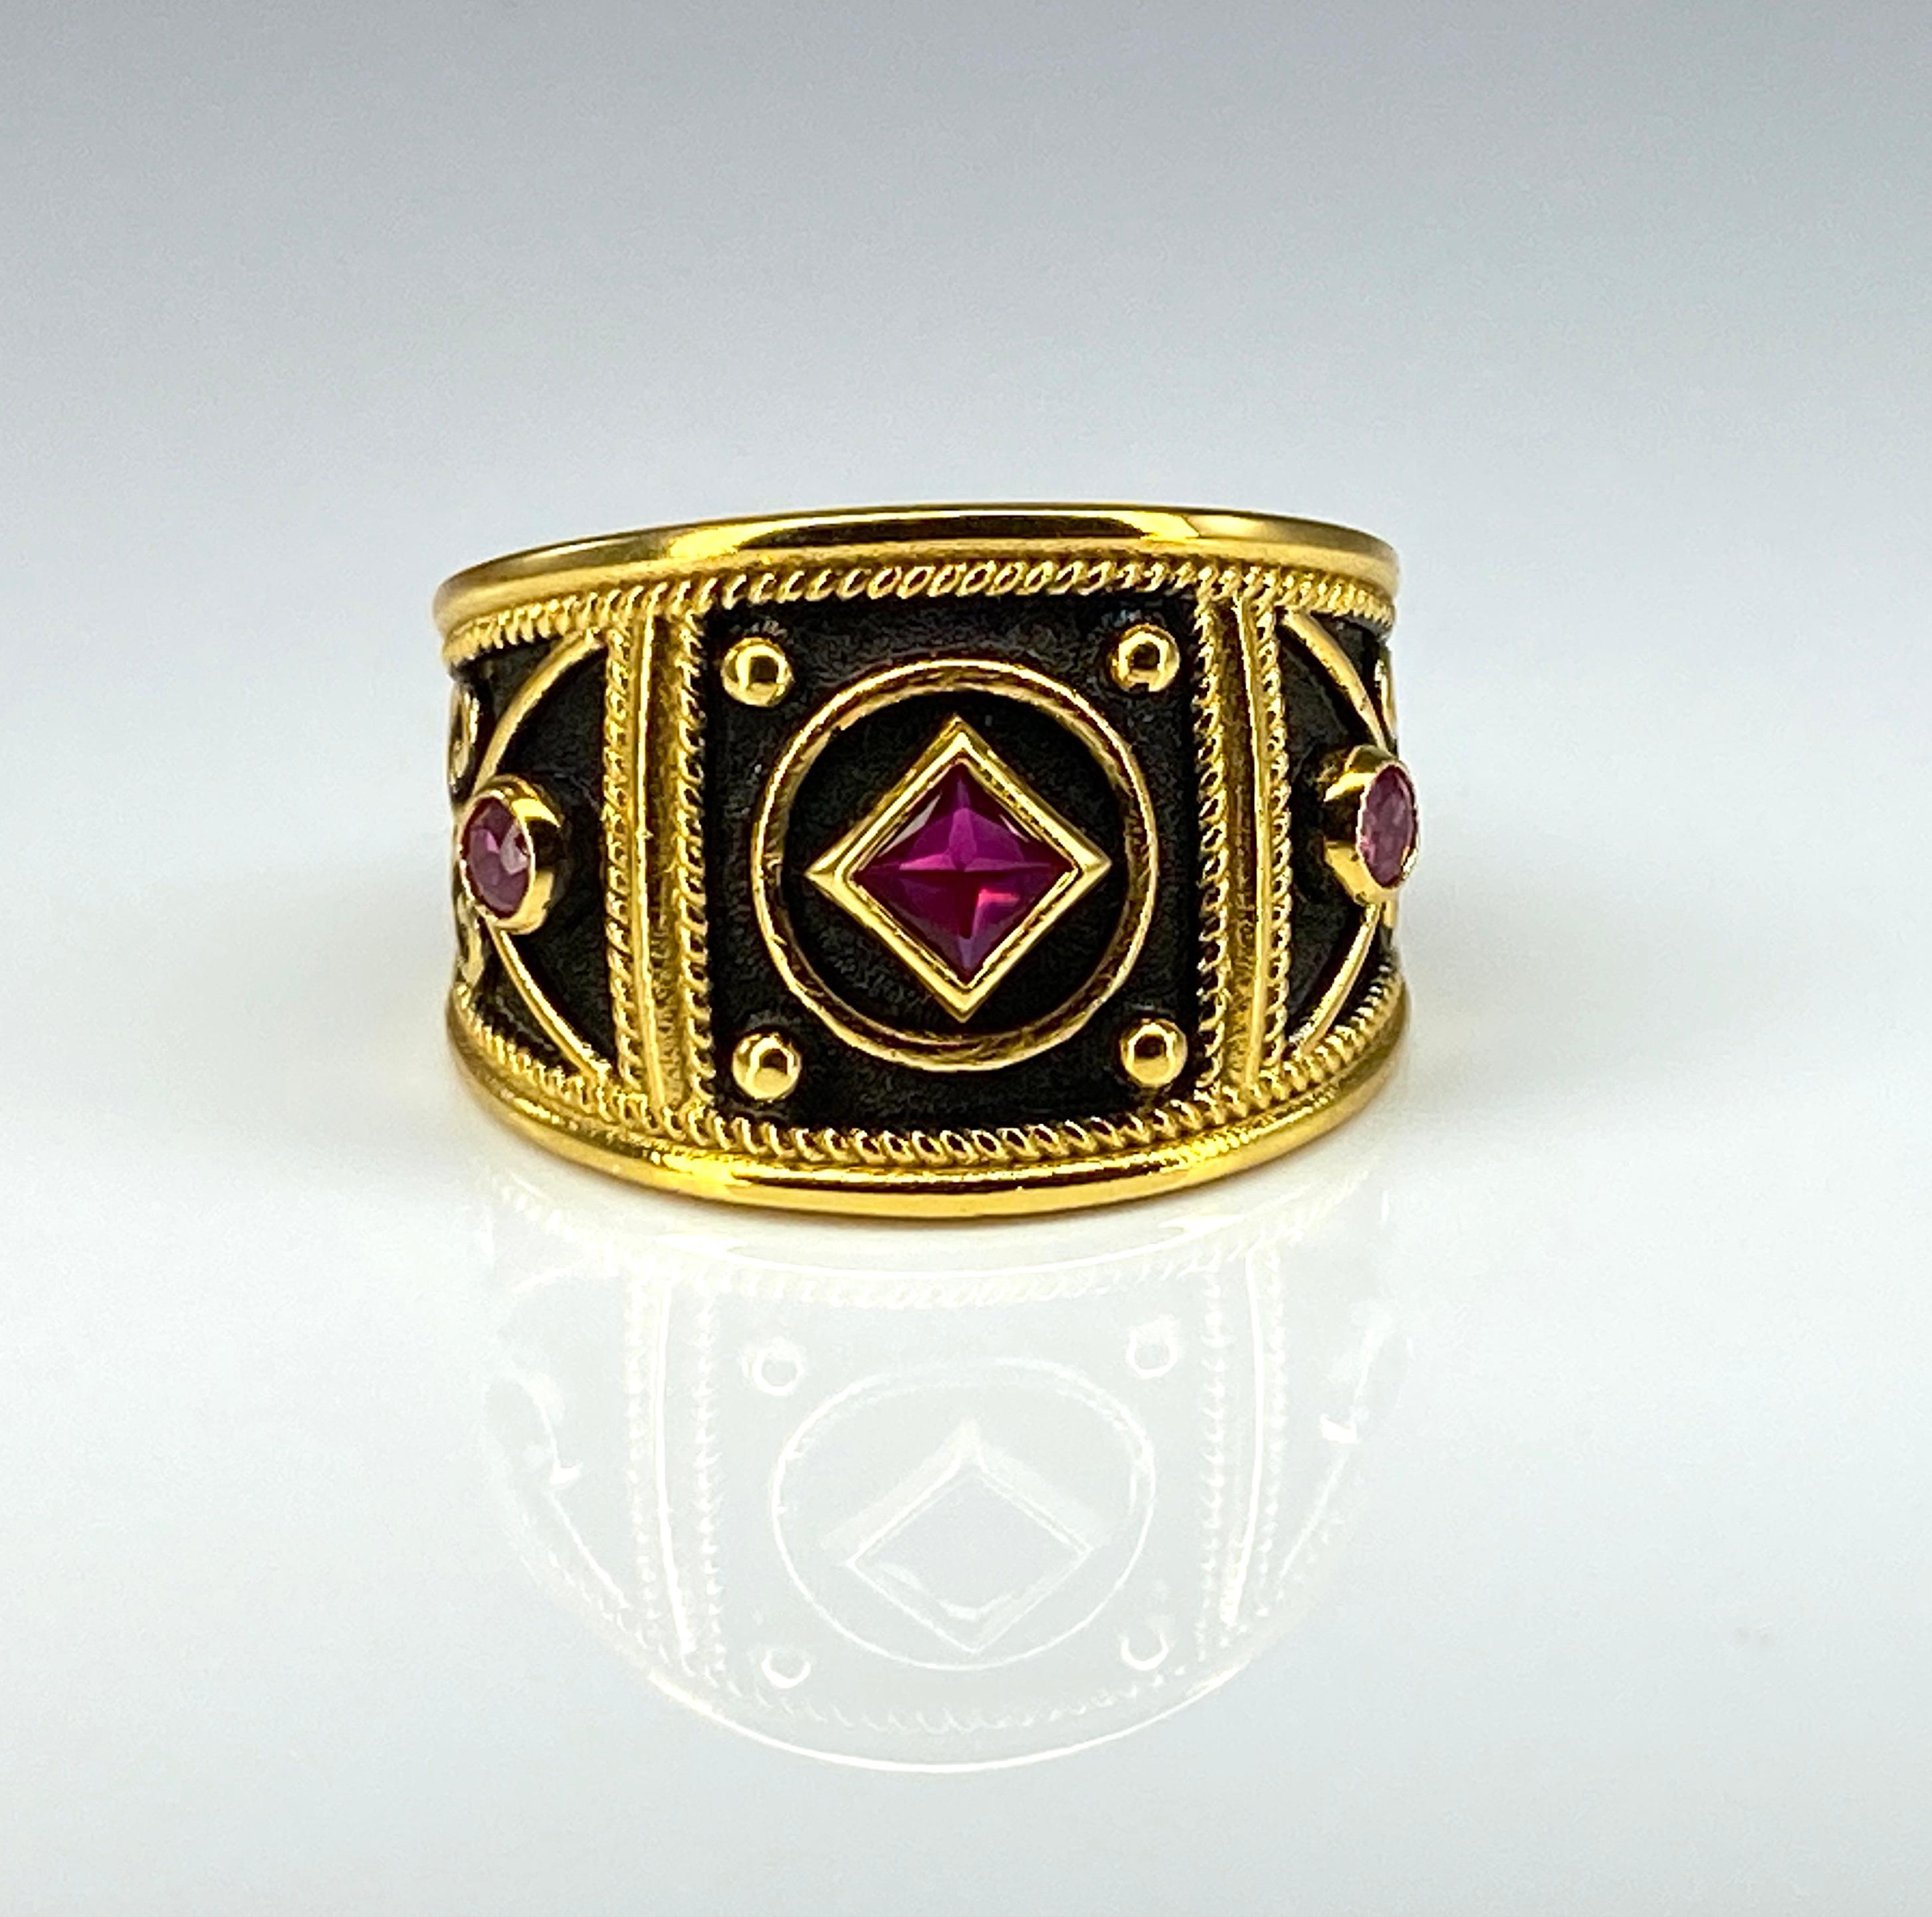 Presenting S.Georgios designer 18 Karat Solid Yellow Gold Ring handmade in a Byzantine Style workmanship with a unique velvet background finished with Black Rhodium. This graduated ring with a big display is decorated with granulation and princess